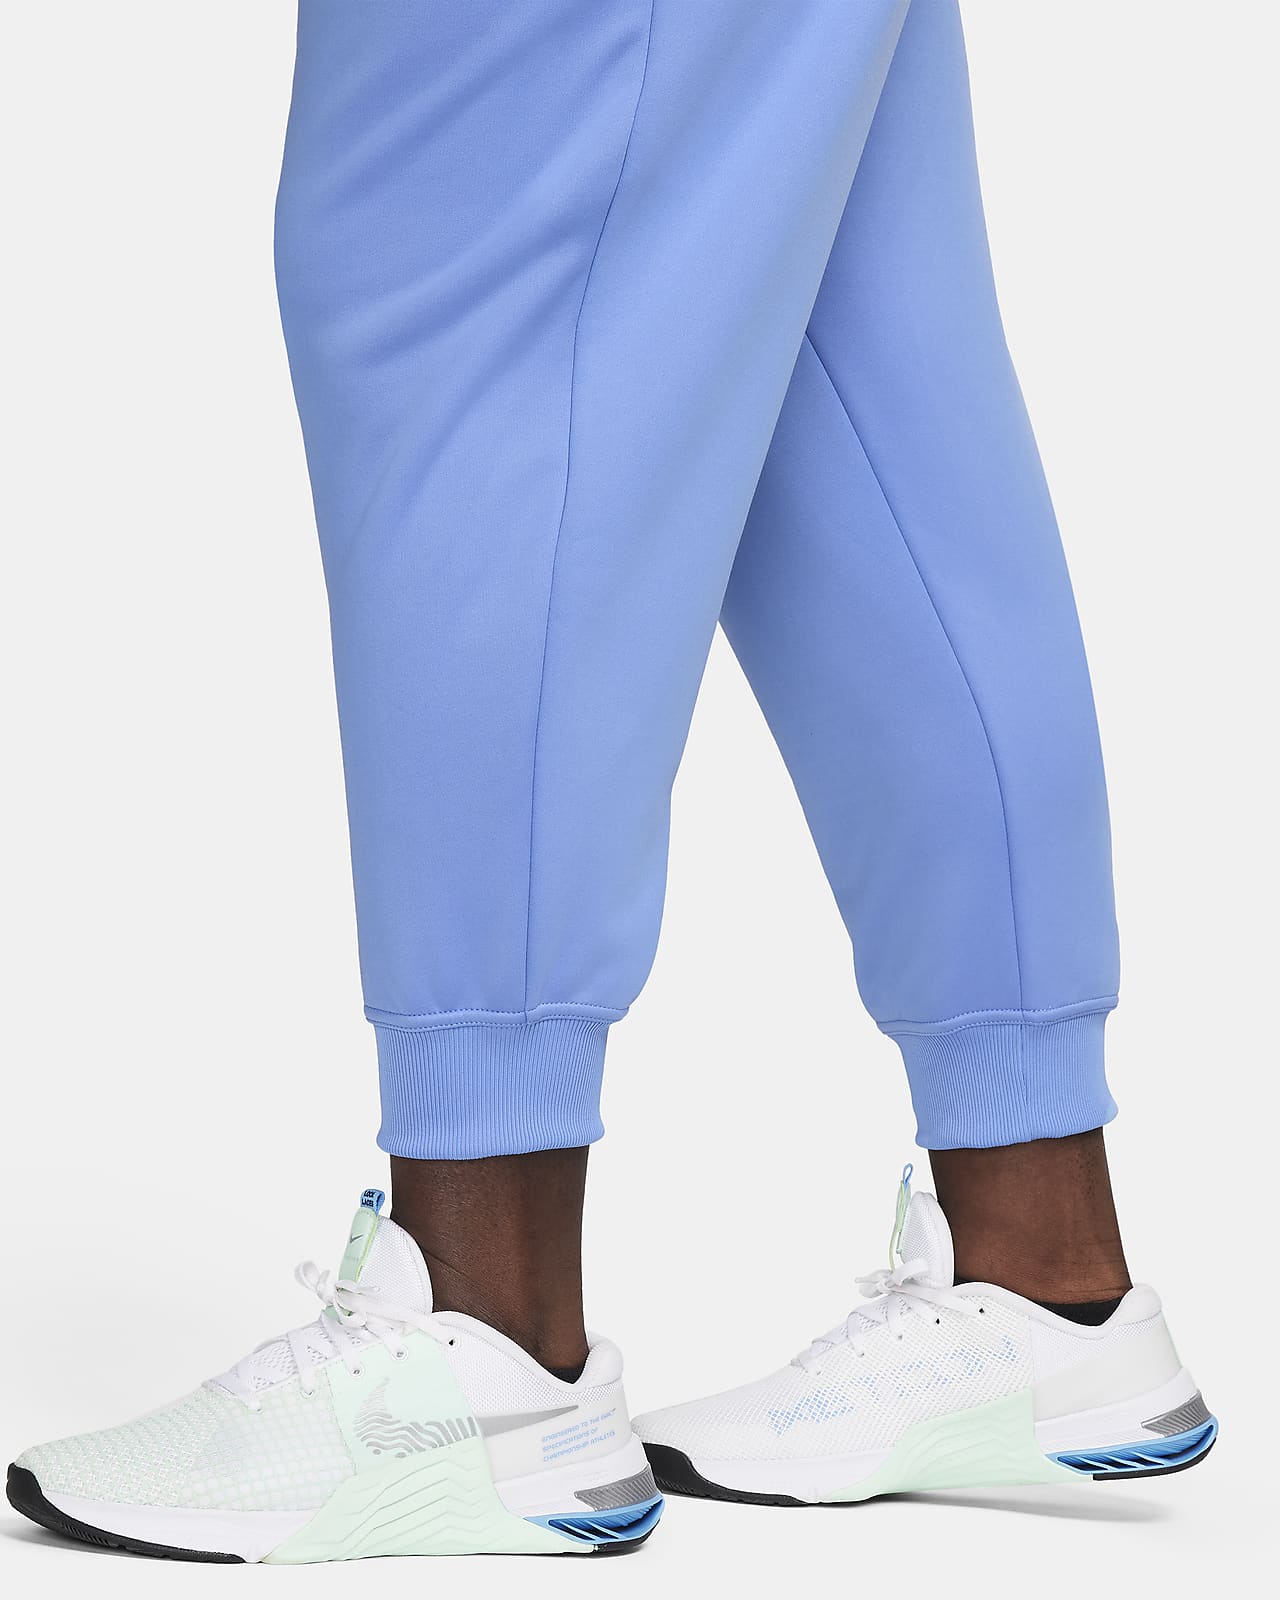 Nike Therma-FIT One Joggers – DTLR